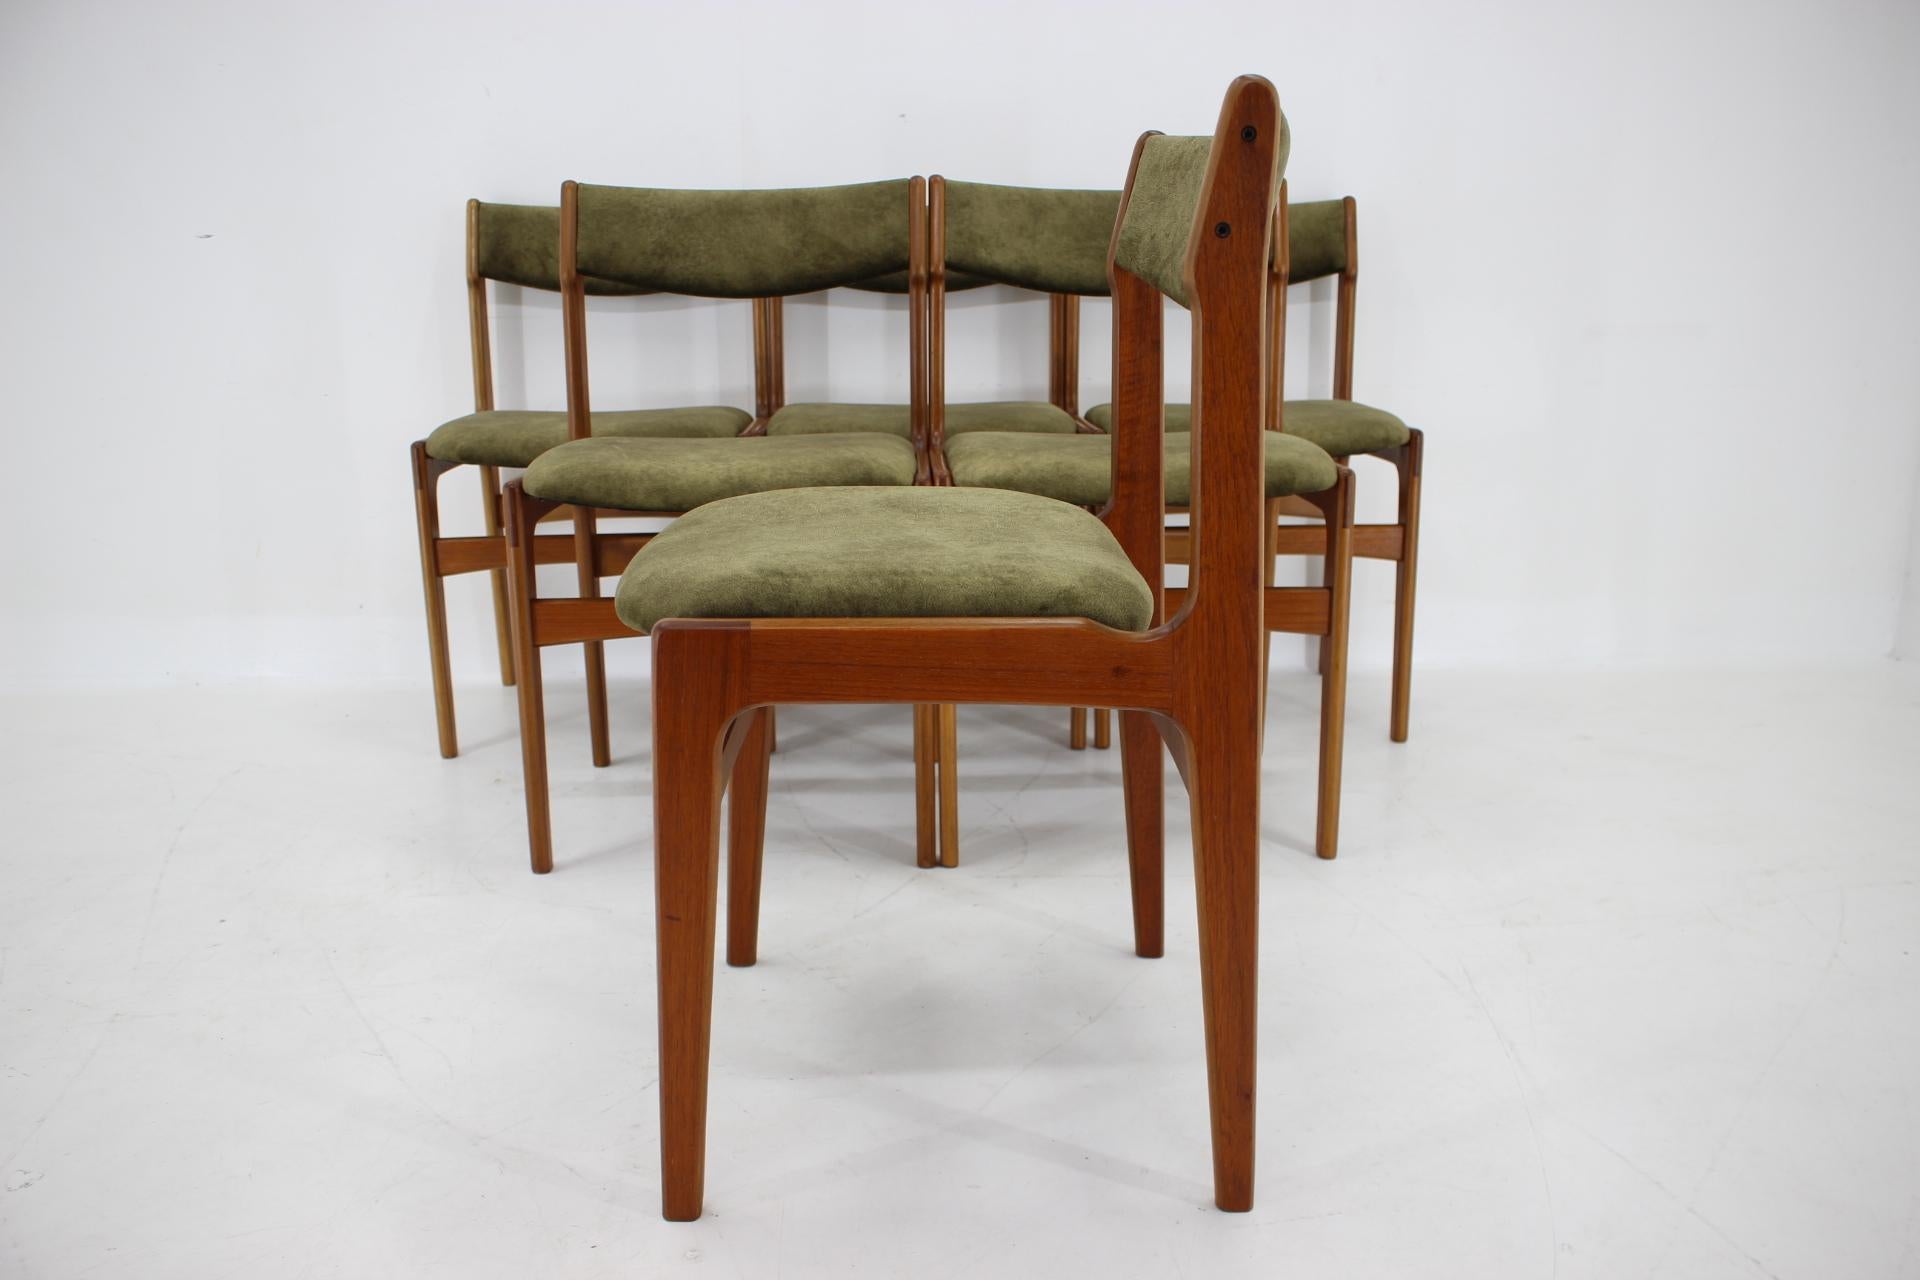 1960s Danish Teak Dining Chairs, Set of 6 For Sale 4